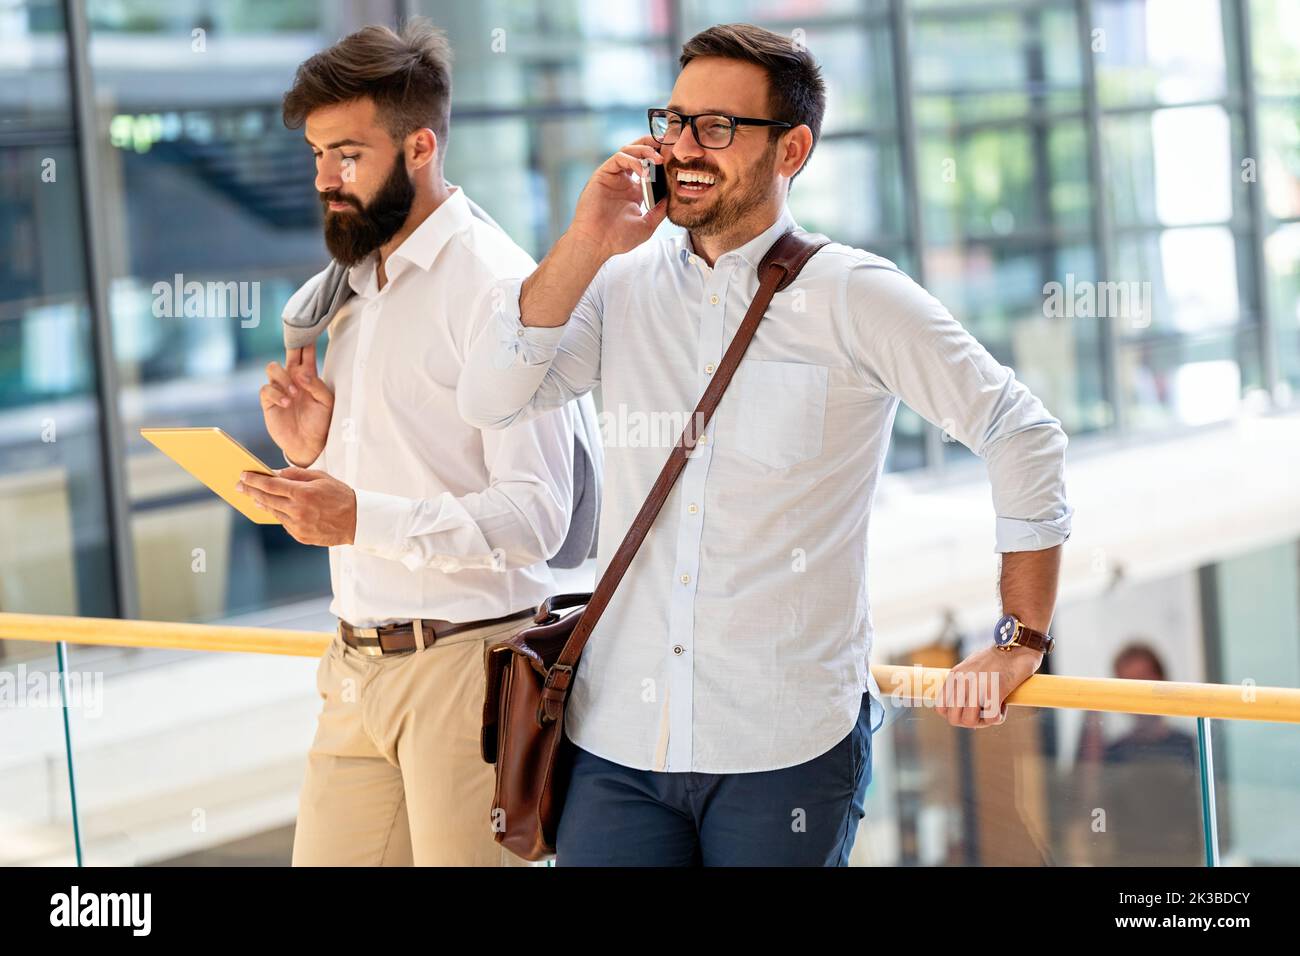 Handsome successful businessman using smartphone in front of office. Technology business concept. Stock Photo